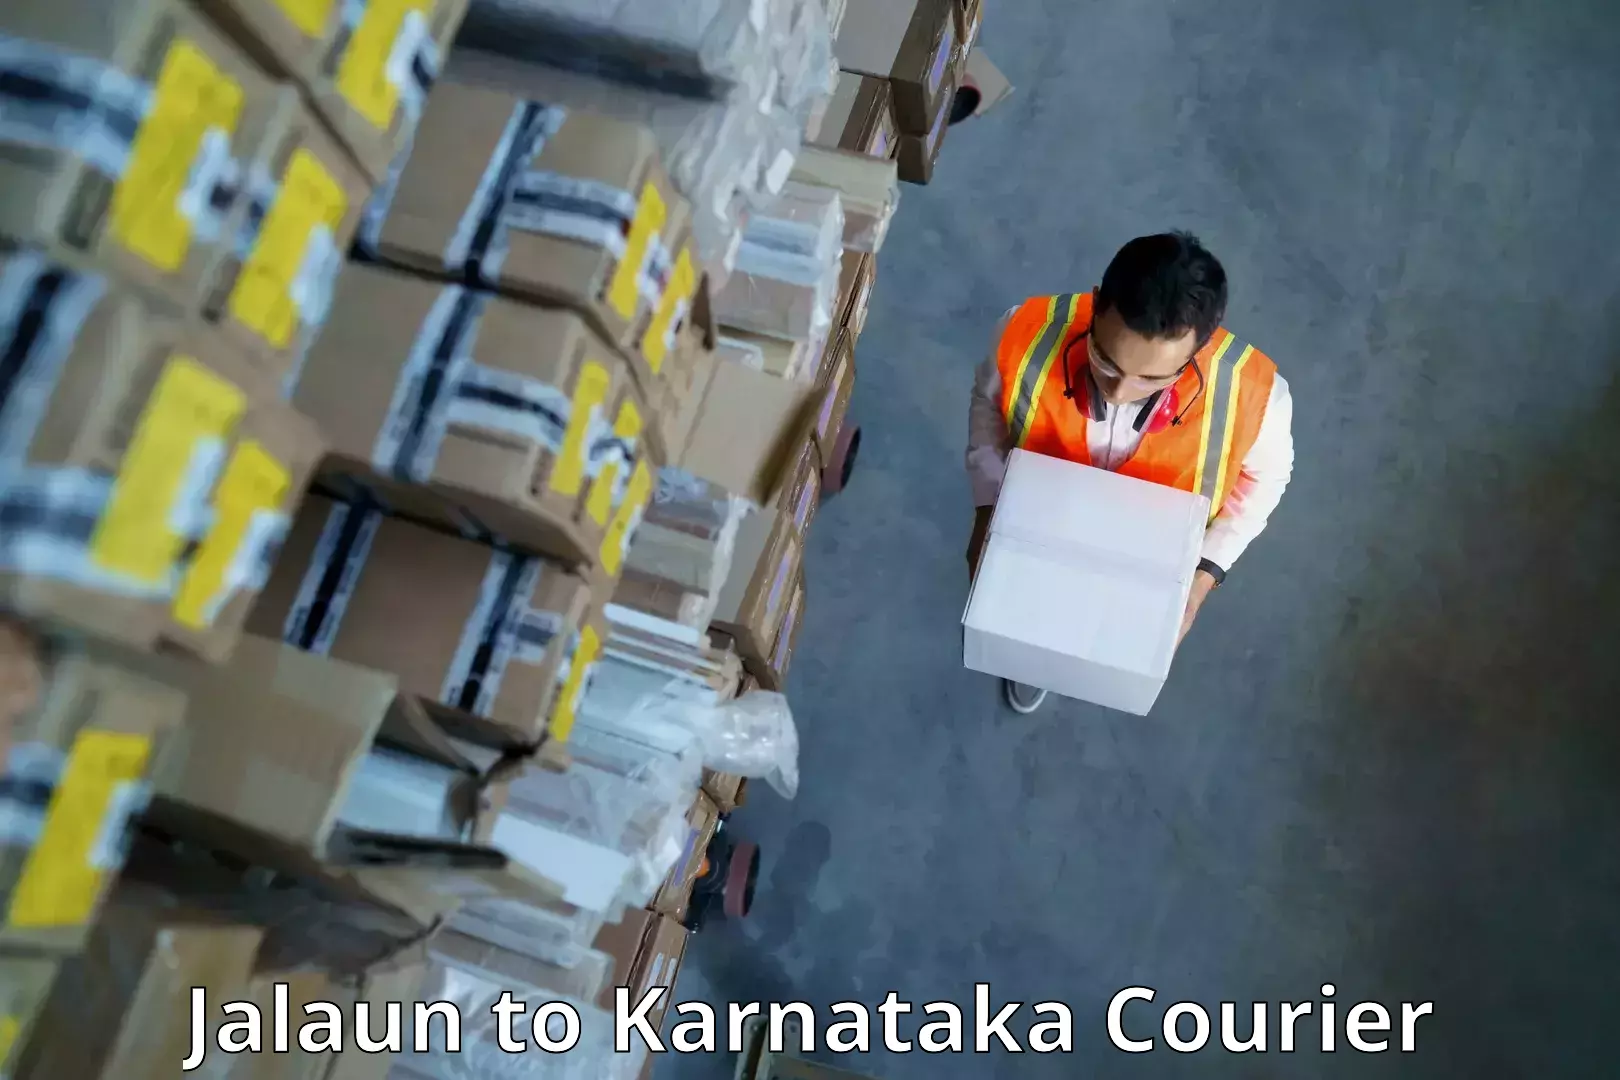 Express delivery capabilities Jalaun to Bangalore